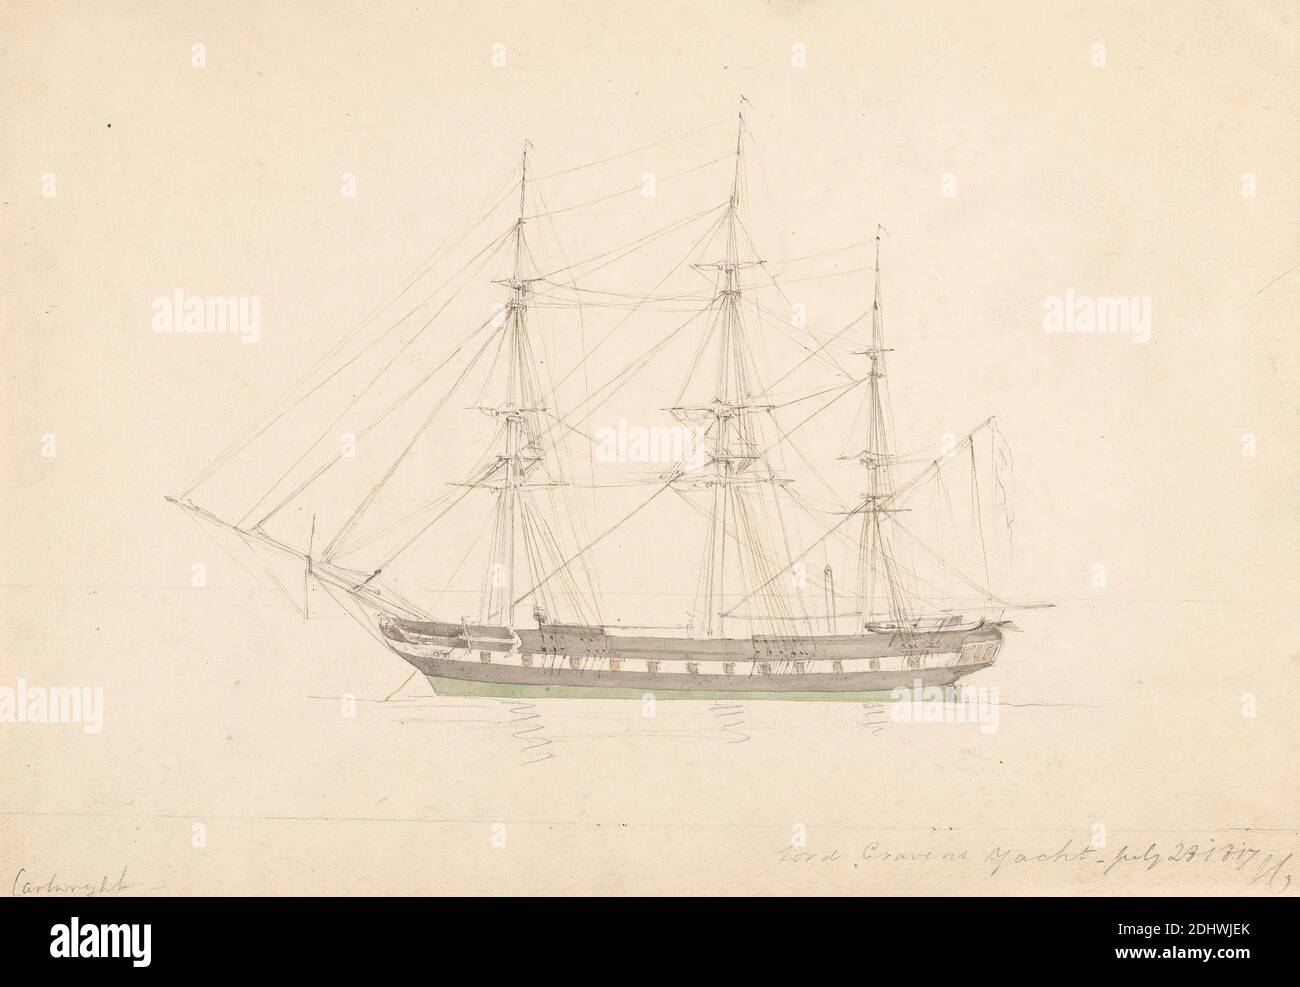 Lord Craven's Yacht, July 23, 1817, Joseph Cartwright, c.1789–1829, British, 1817, Watercolor, with pen, in brown ink and graphite on medium, slightly textured, cream, wove paper, mounted on, moderately thick, slightly textured, cream, wove paper, Mount: 15 7/8 × 15 5/8 inches (40.3 × 39.7 cm) and Sheet: 7 5/8 × 10 15/16 inches (19.4 × 27.8 cm Stock Photo